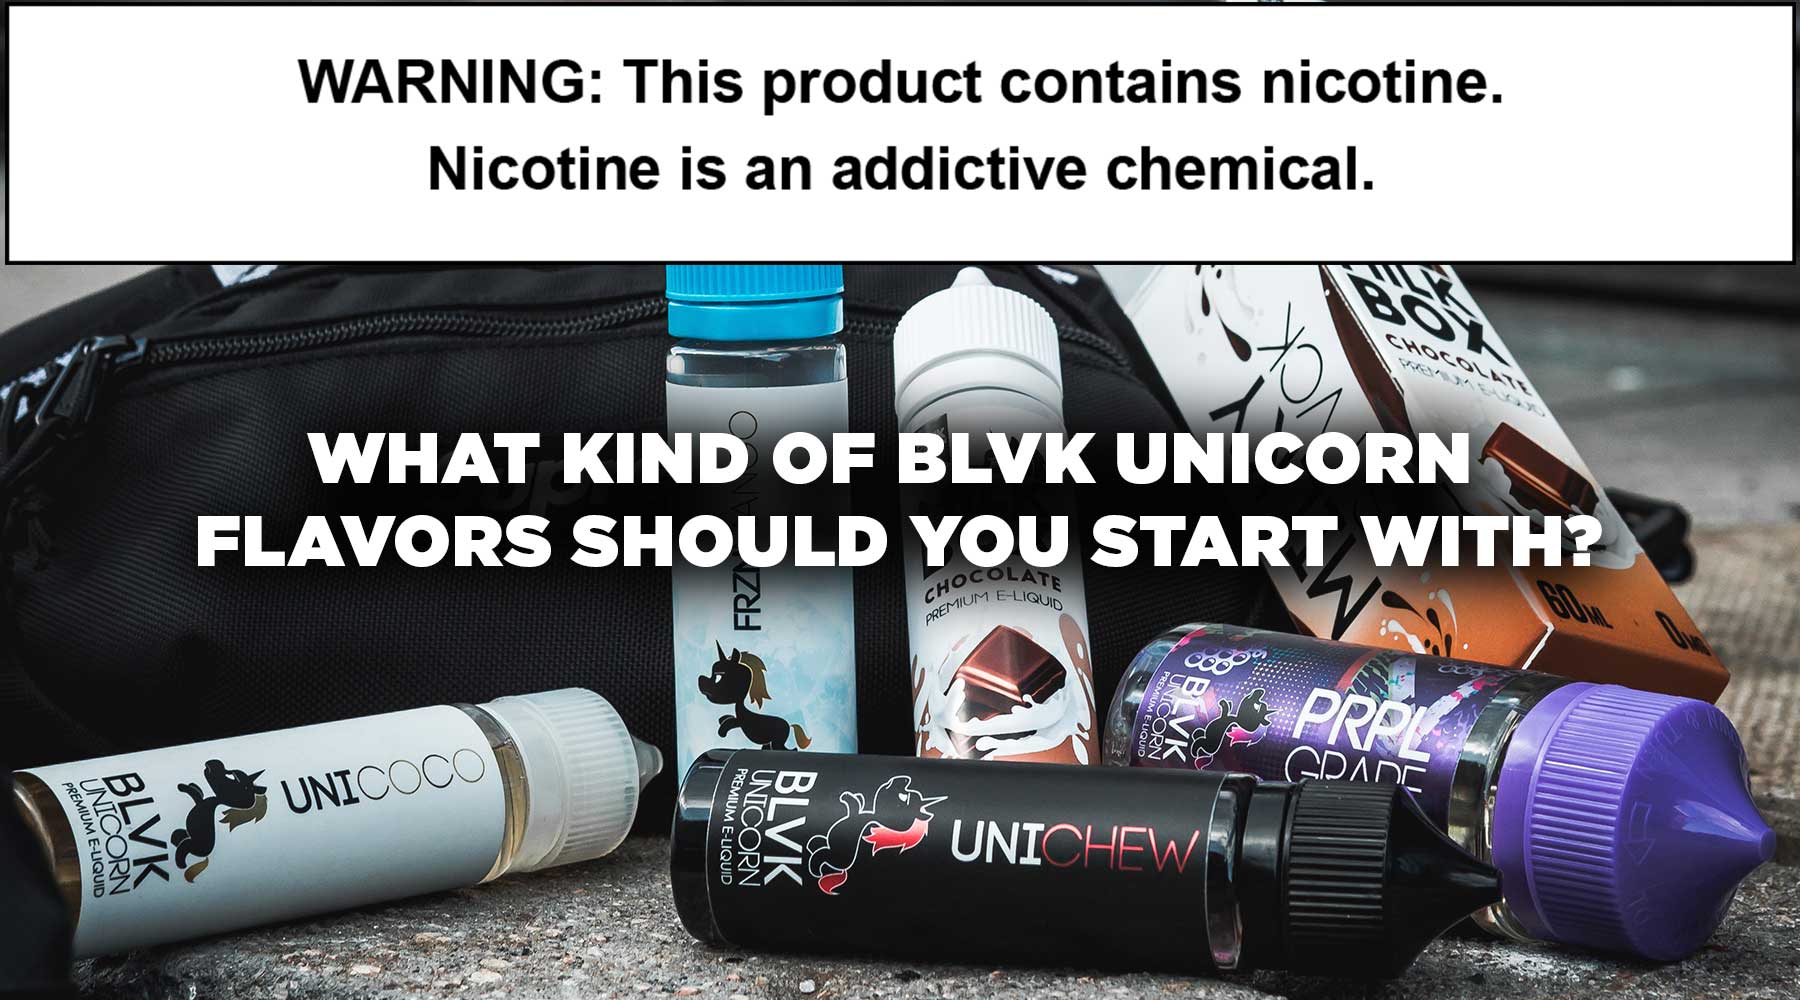 What Kind Of BLVK Unicorn Flavors Should You Start With?